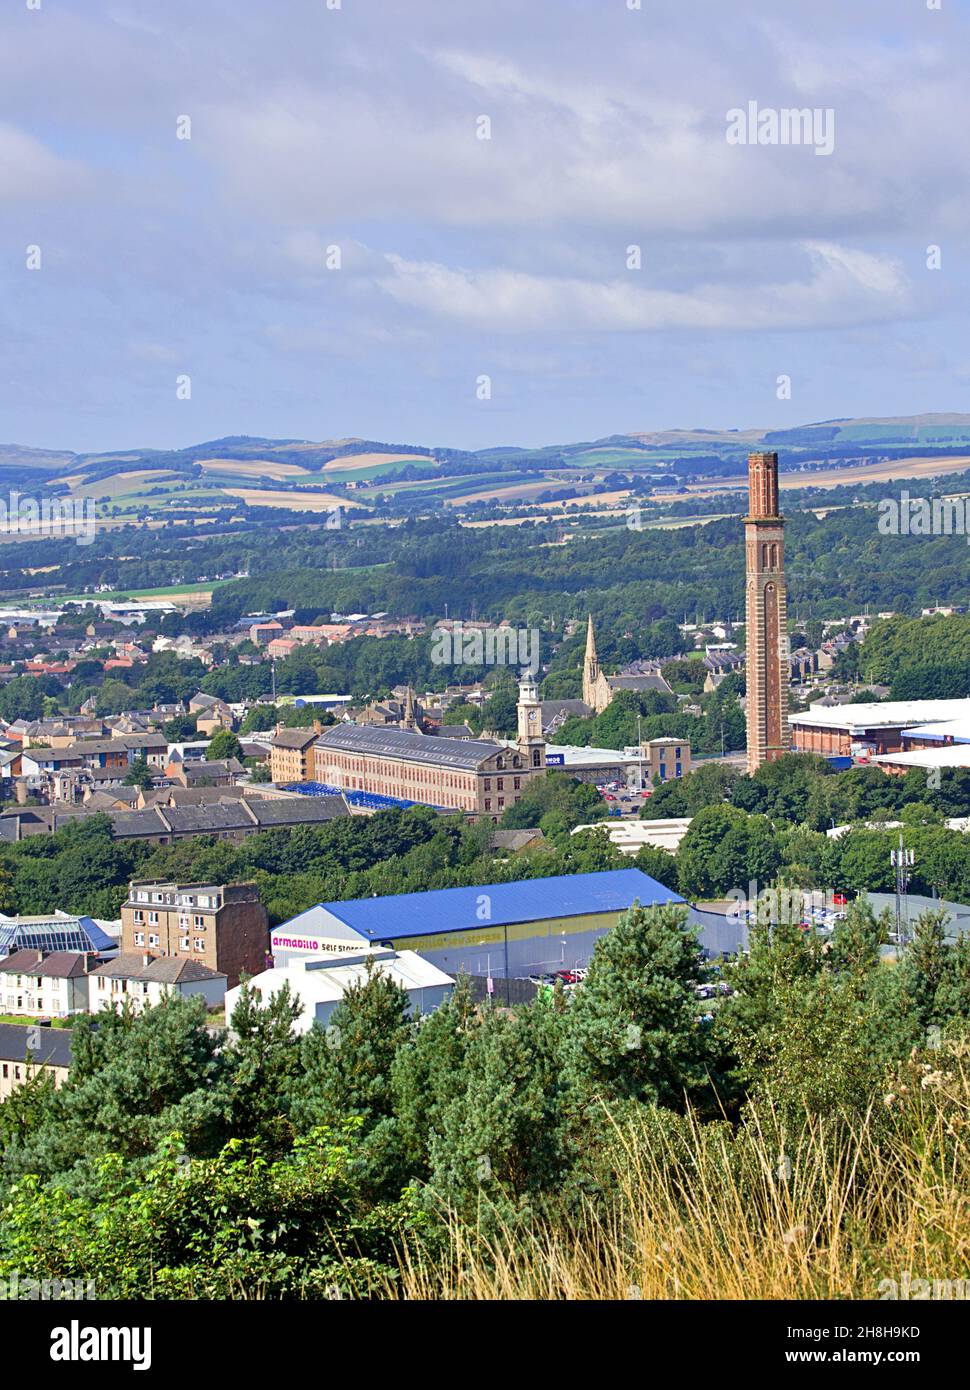 Views of the Scottish city of Dundee seen from Dundee Law in August 2021 Stock Photo